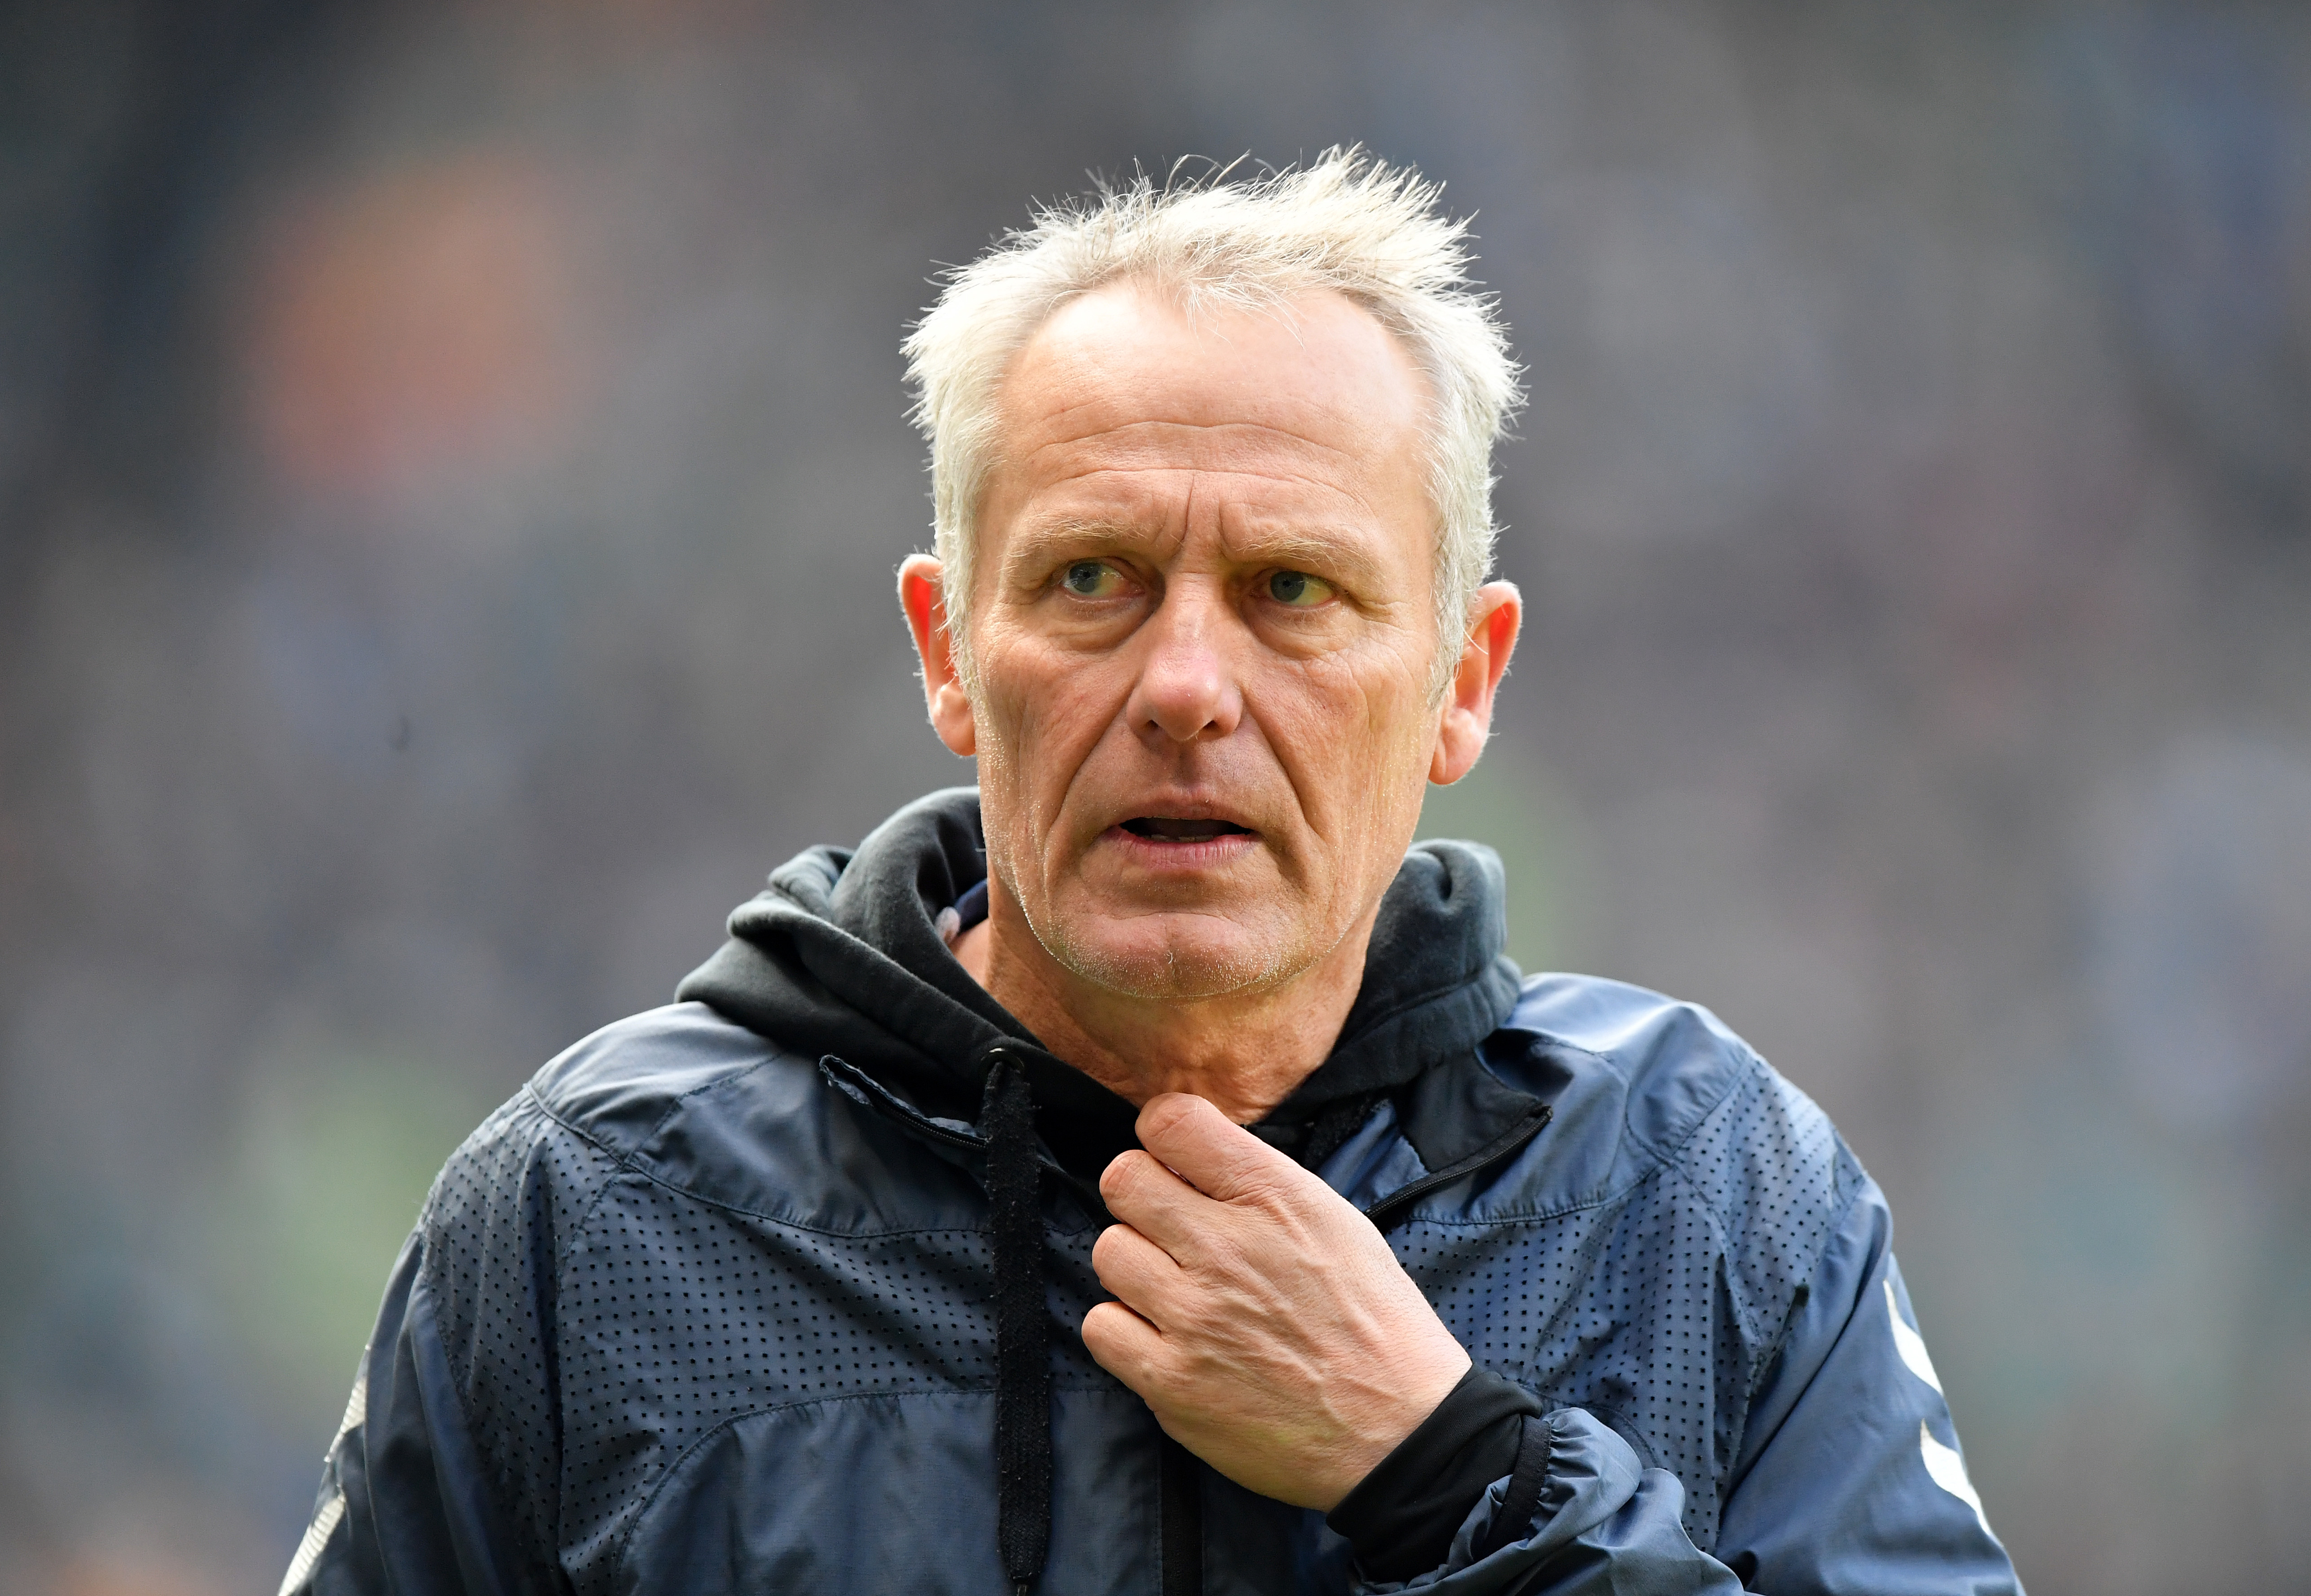 A Christian Streich, masterclass incoming? (Photo by Stuart Franklin/Bongarts/Getty Images)